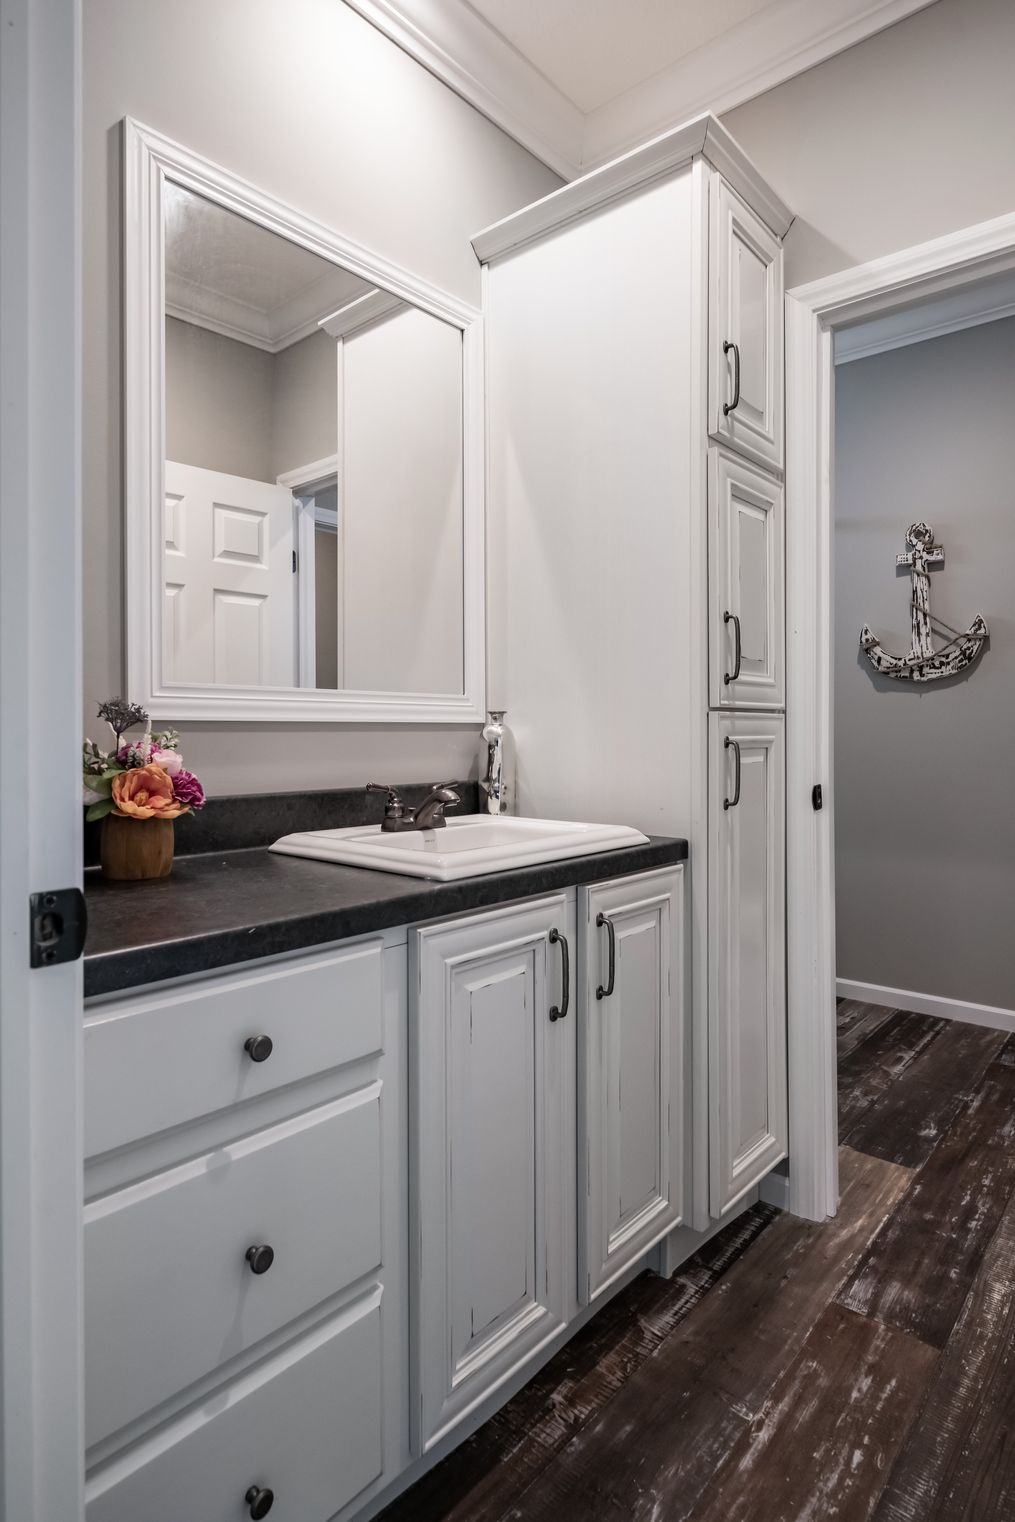 The THE TEAGAN Master Bathroom. This Manufactured Mobile Home features 4 bedrooms and 3 baths.